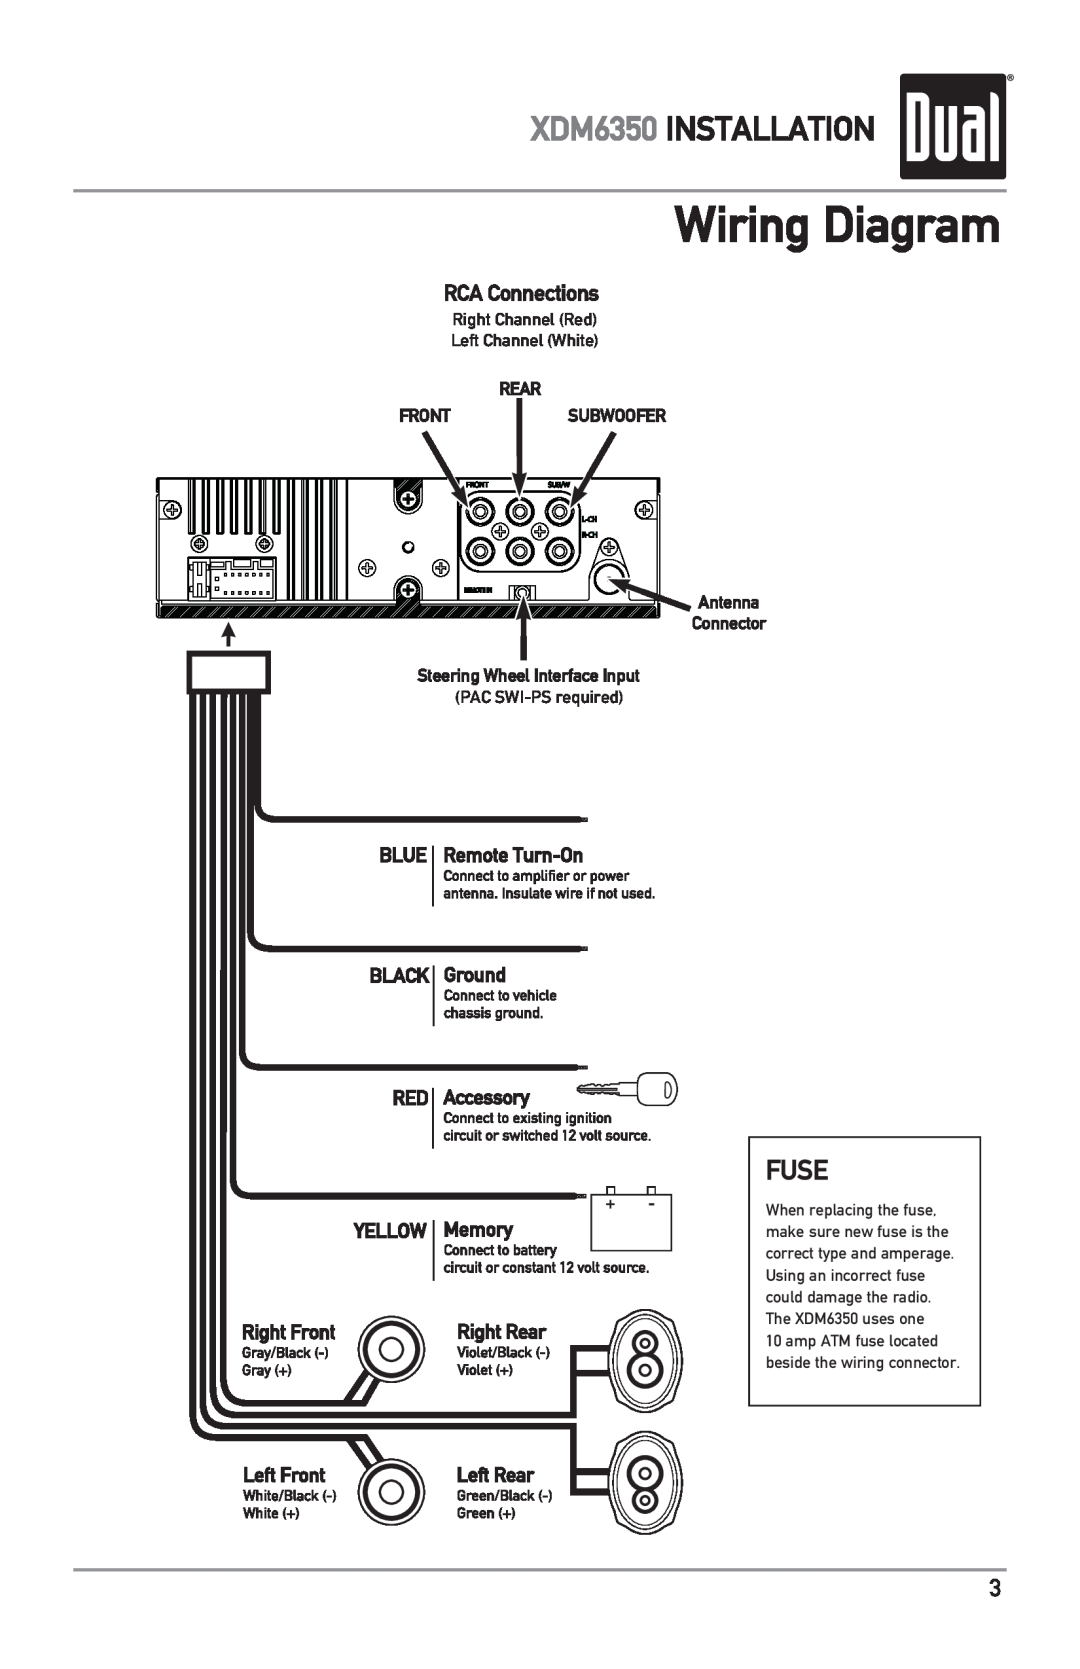 Dual owner manual Wiring Diagram, Fuse, XDM6350 INSTALLATION, RCA Connections 